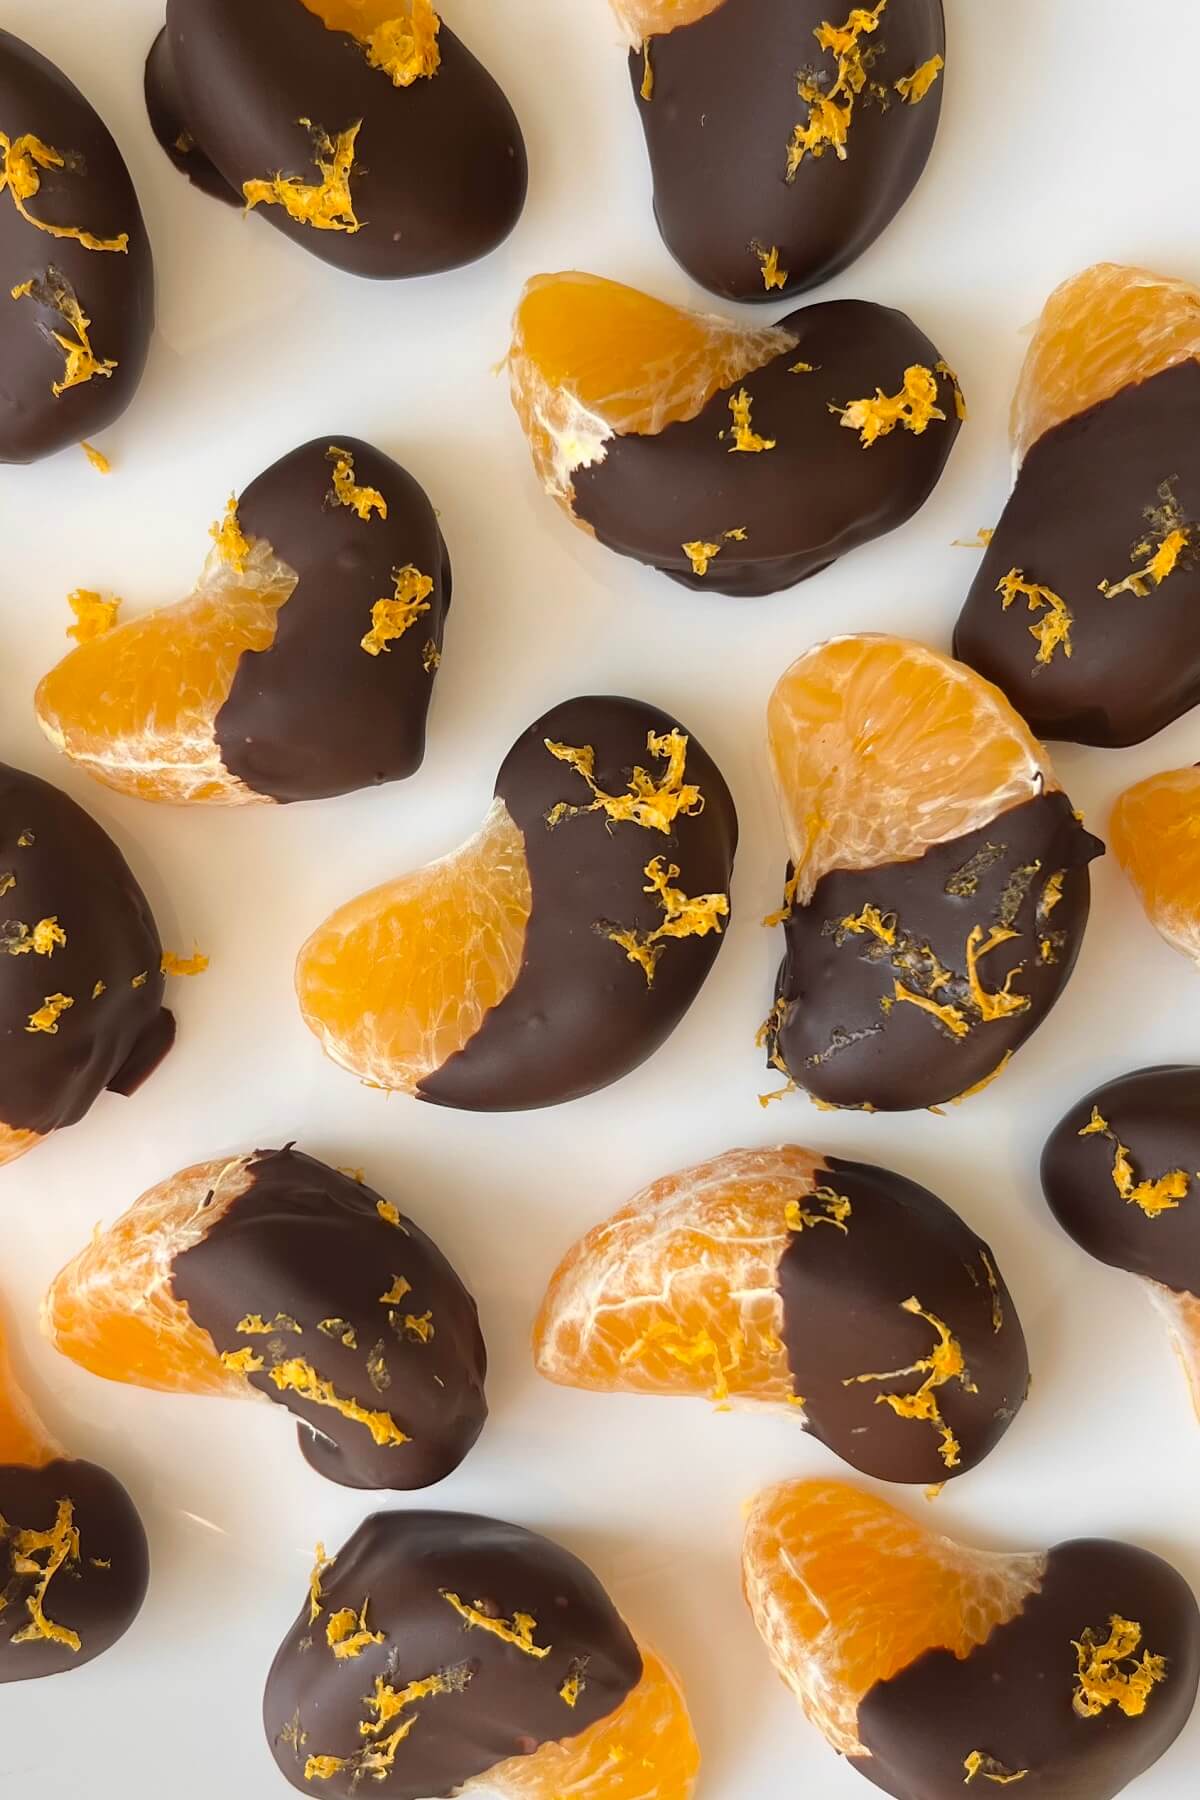 Chocolate coated oranges sprinkled with zest.